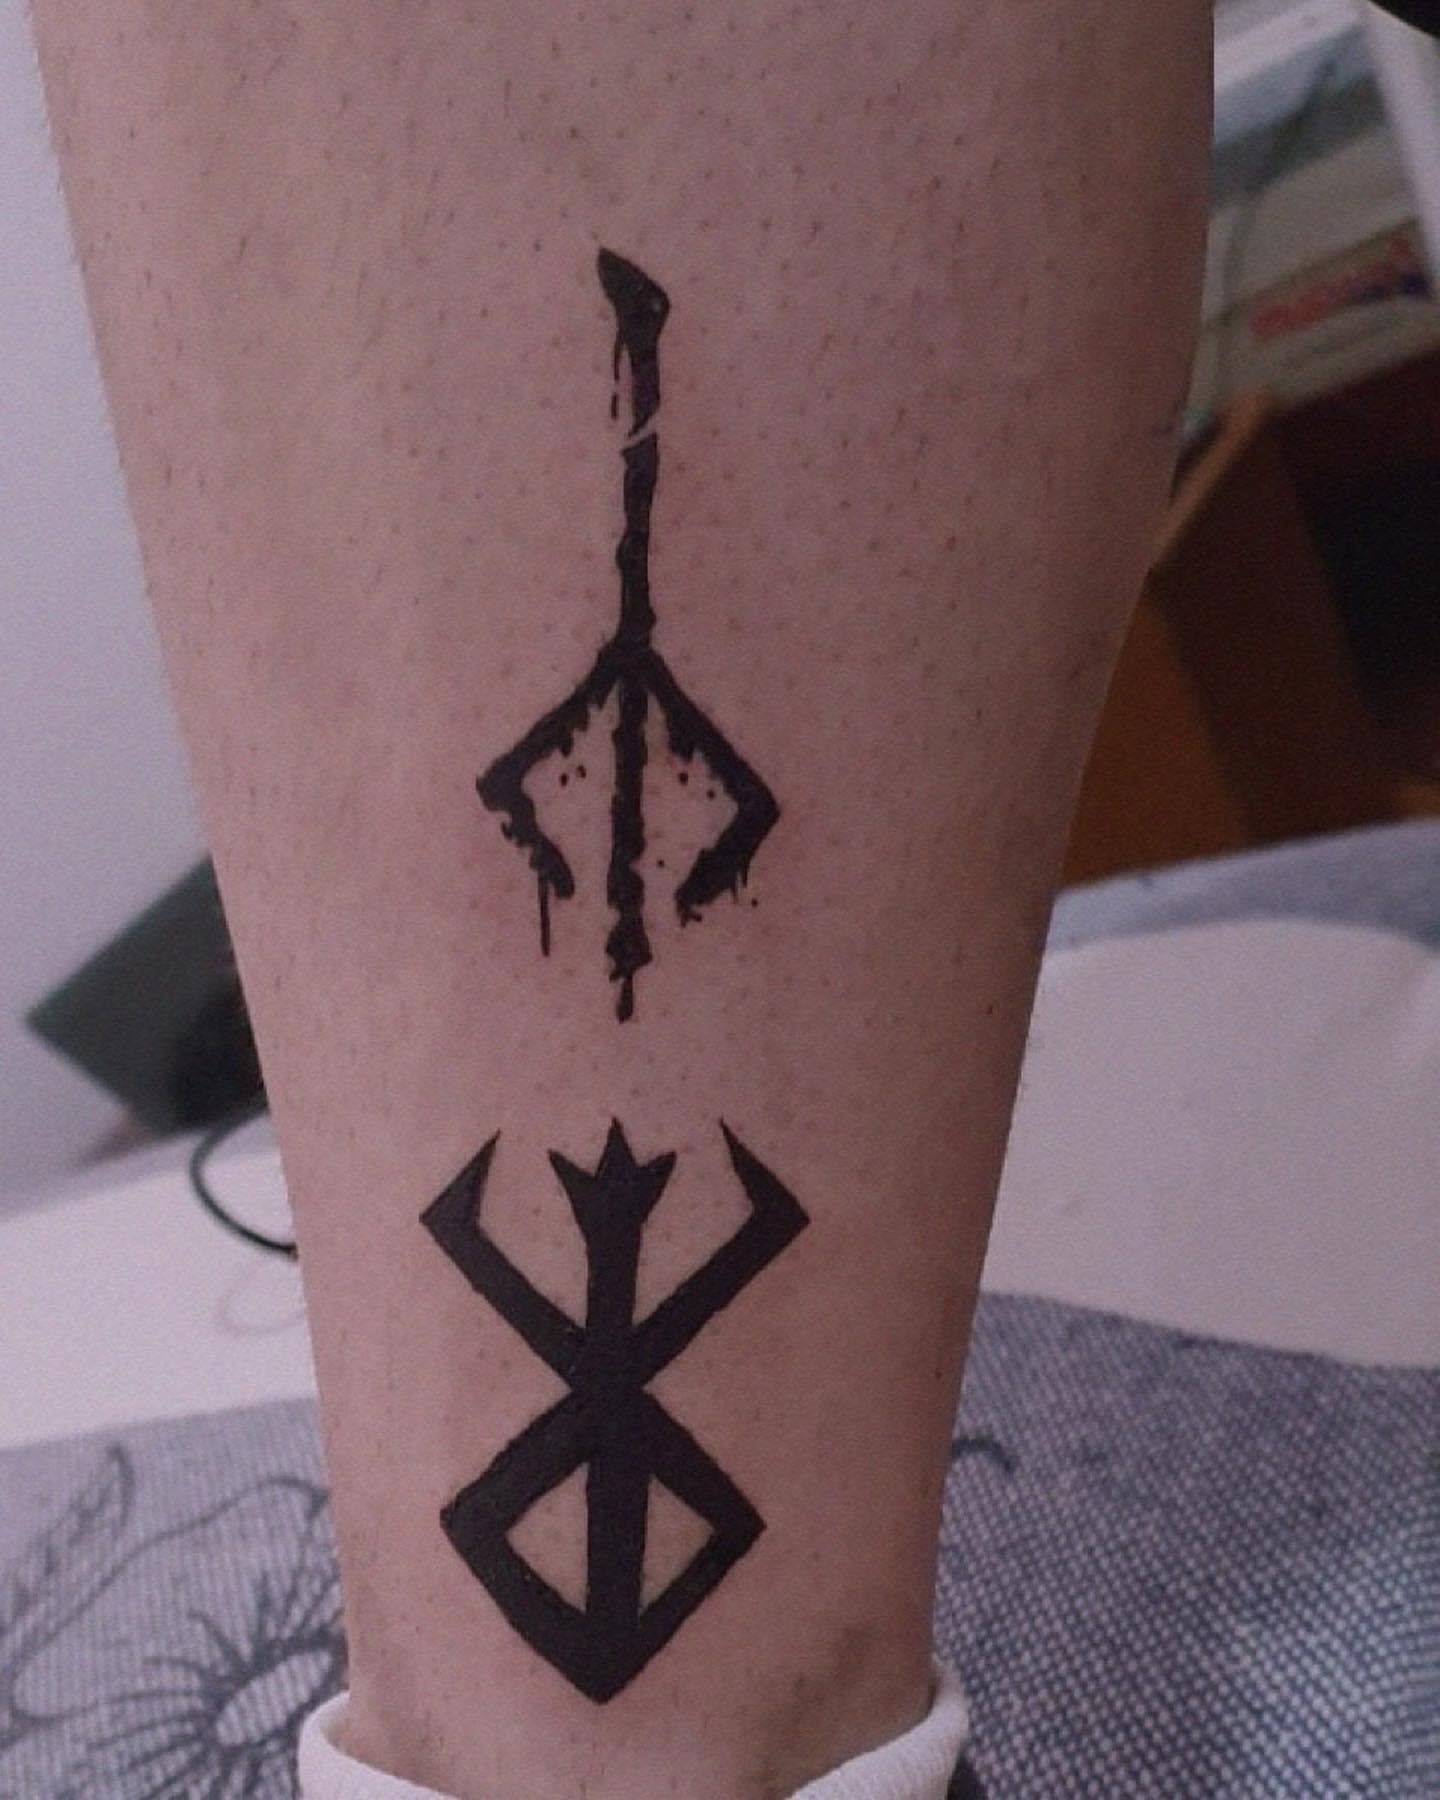 My caryll runes tattoo, had them for a while but never shared : r/bloodborne